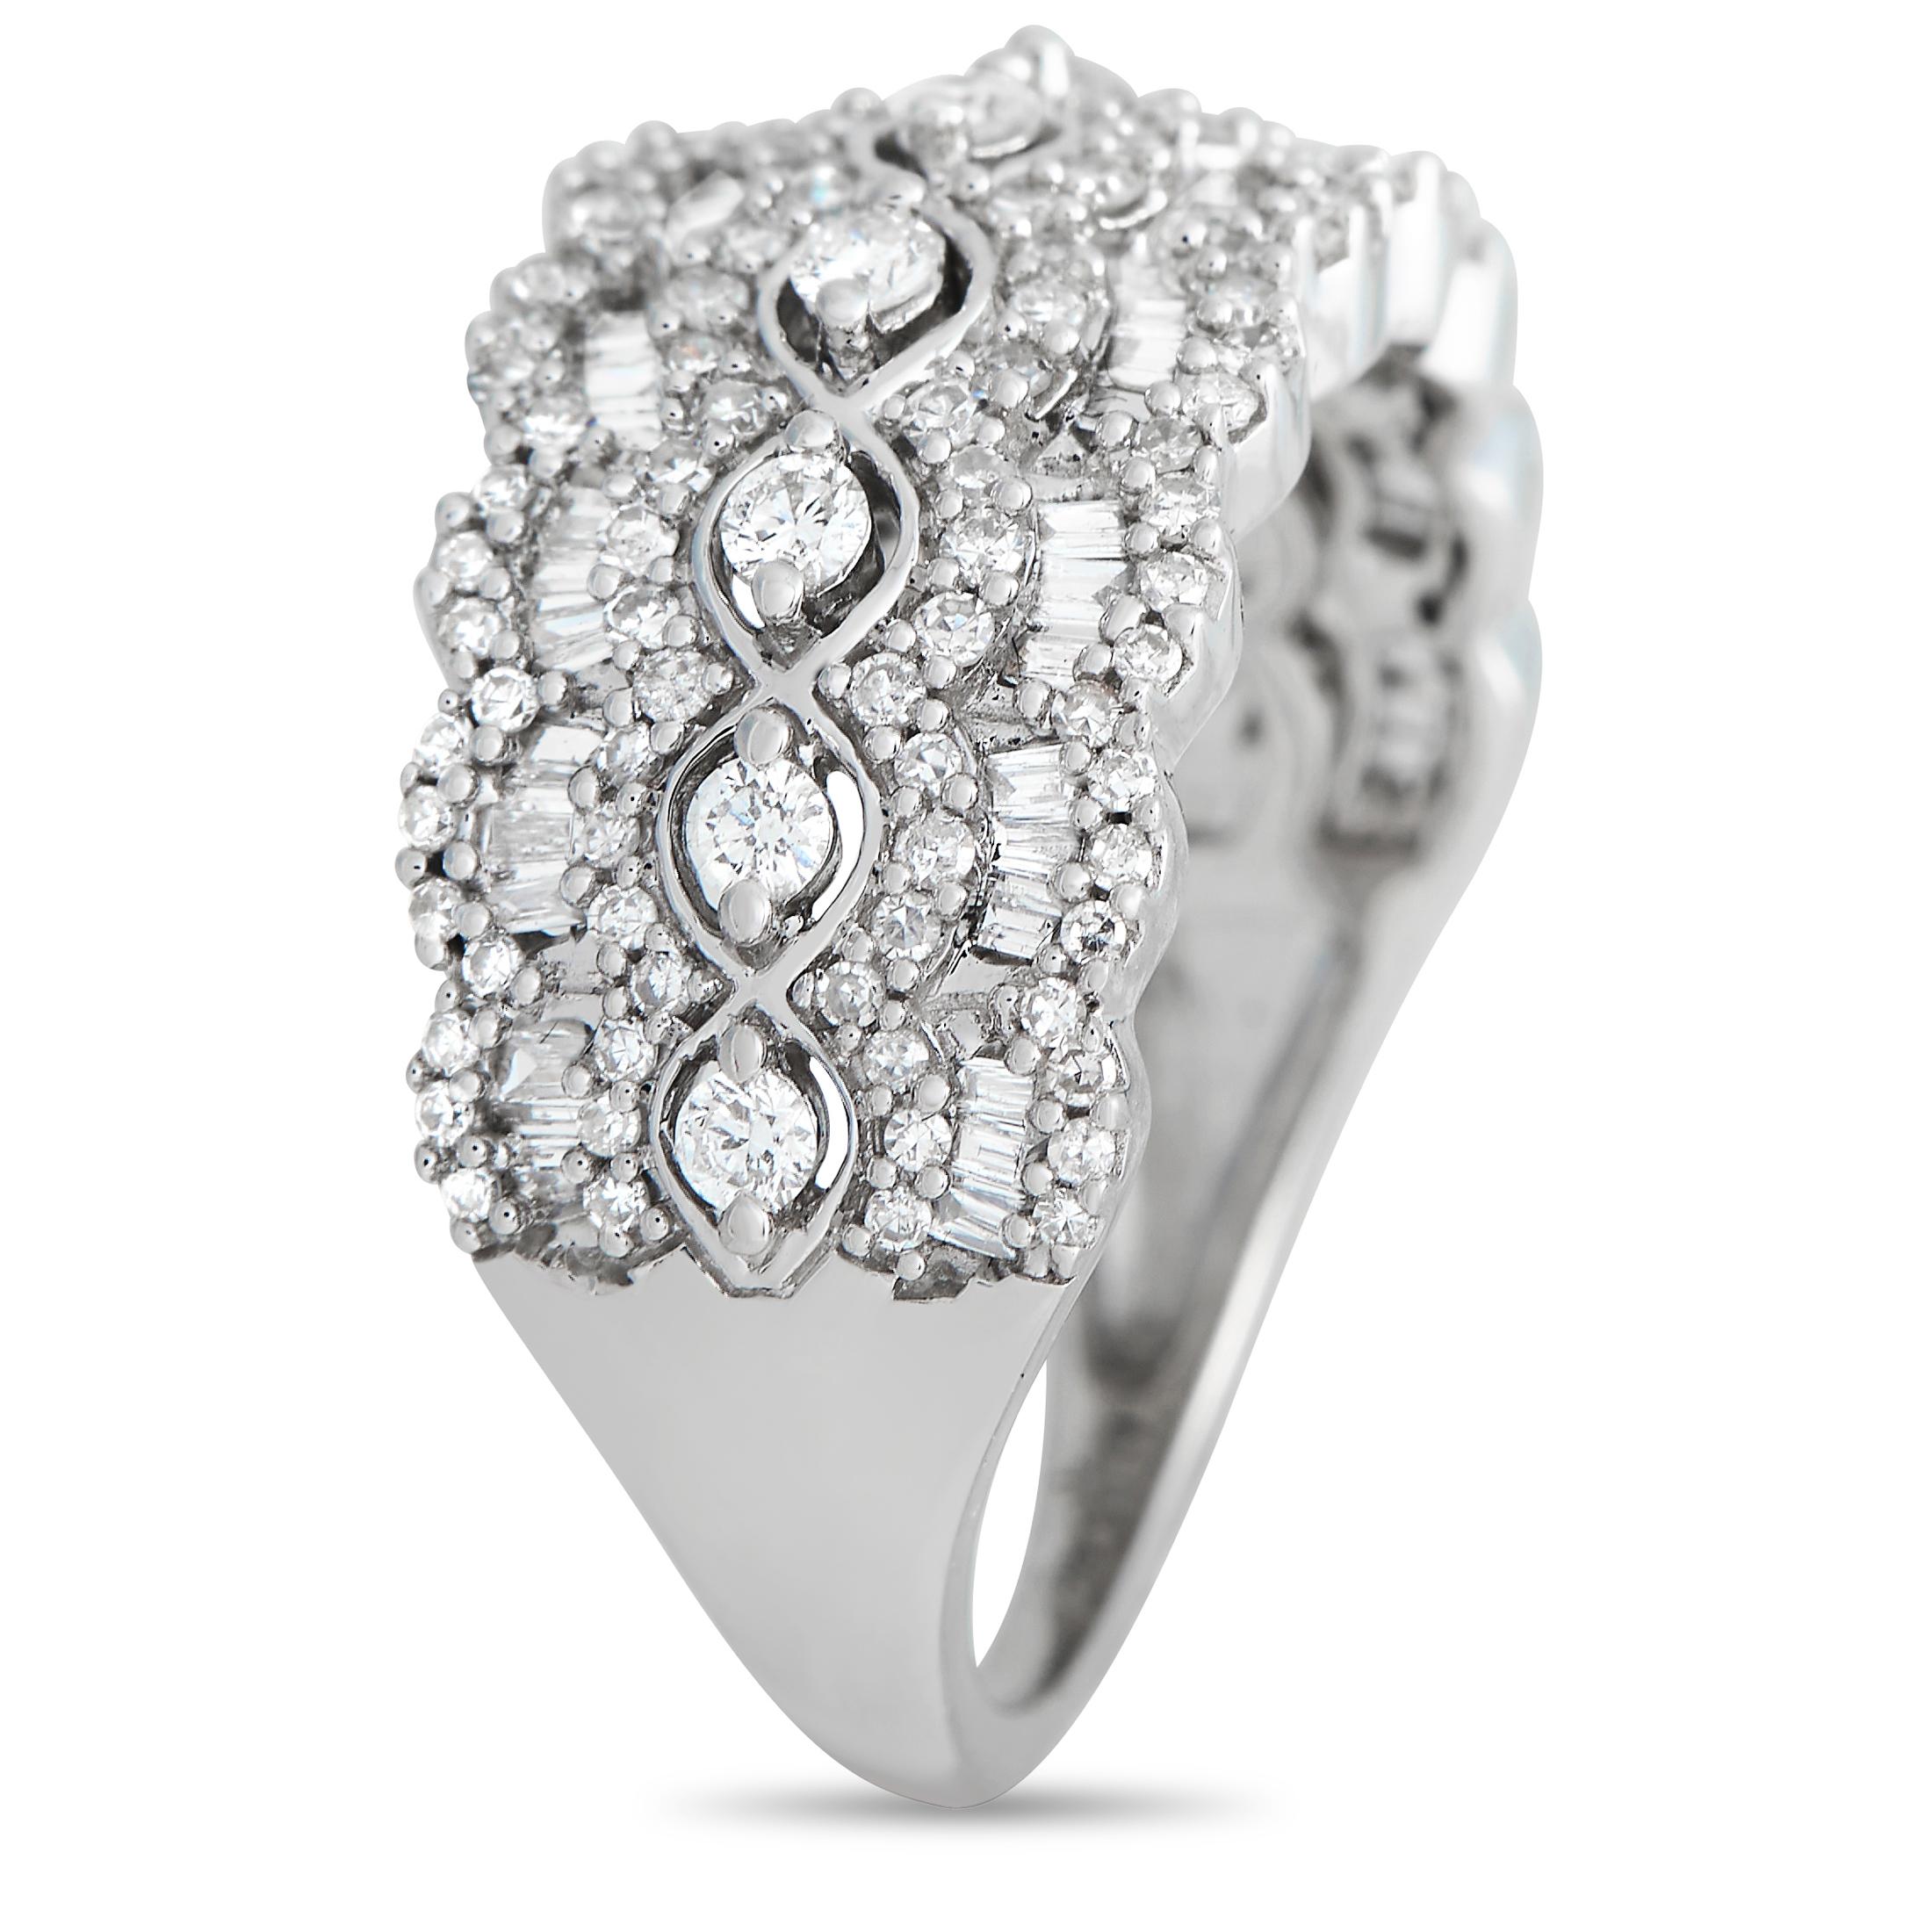 This opulent 14K white gold ring will continually make a statement. A dazzling array of diamonds totaling 1.0 carats allow it to effortlessly catch the light. This piece features a band width and top height both measuring 3mm.This jewelry piece is